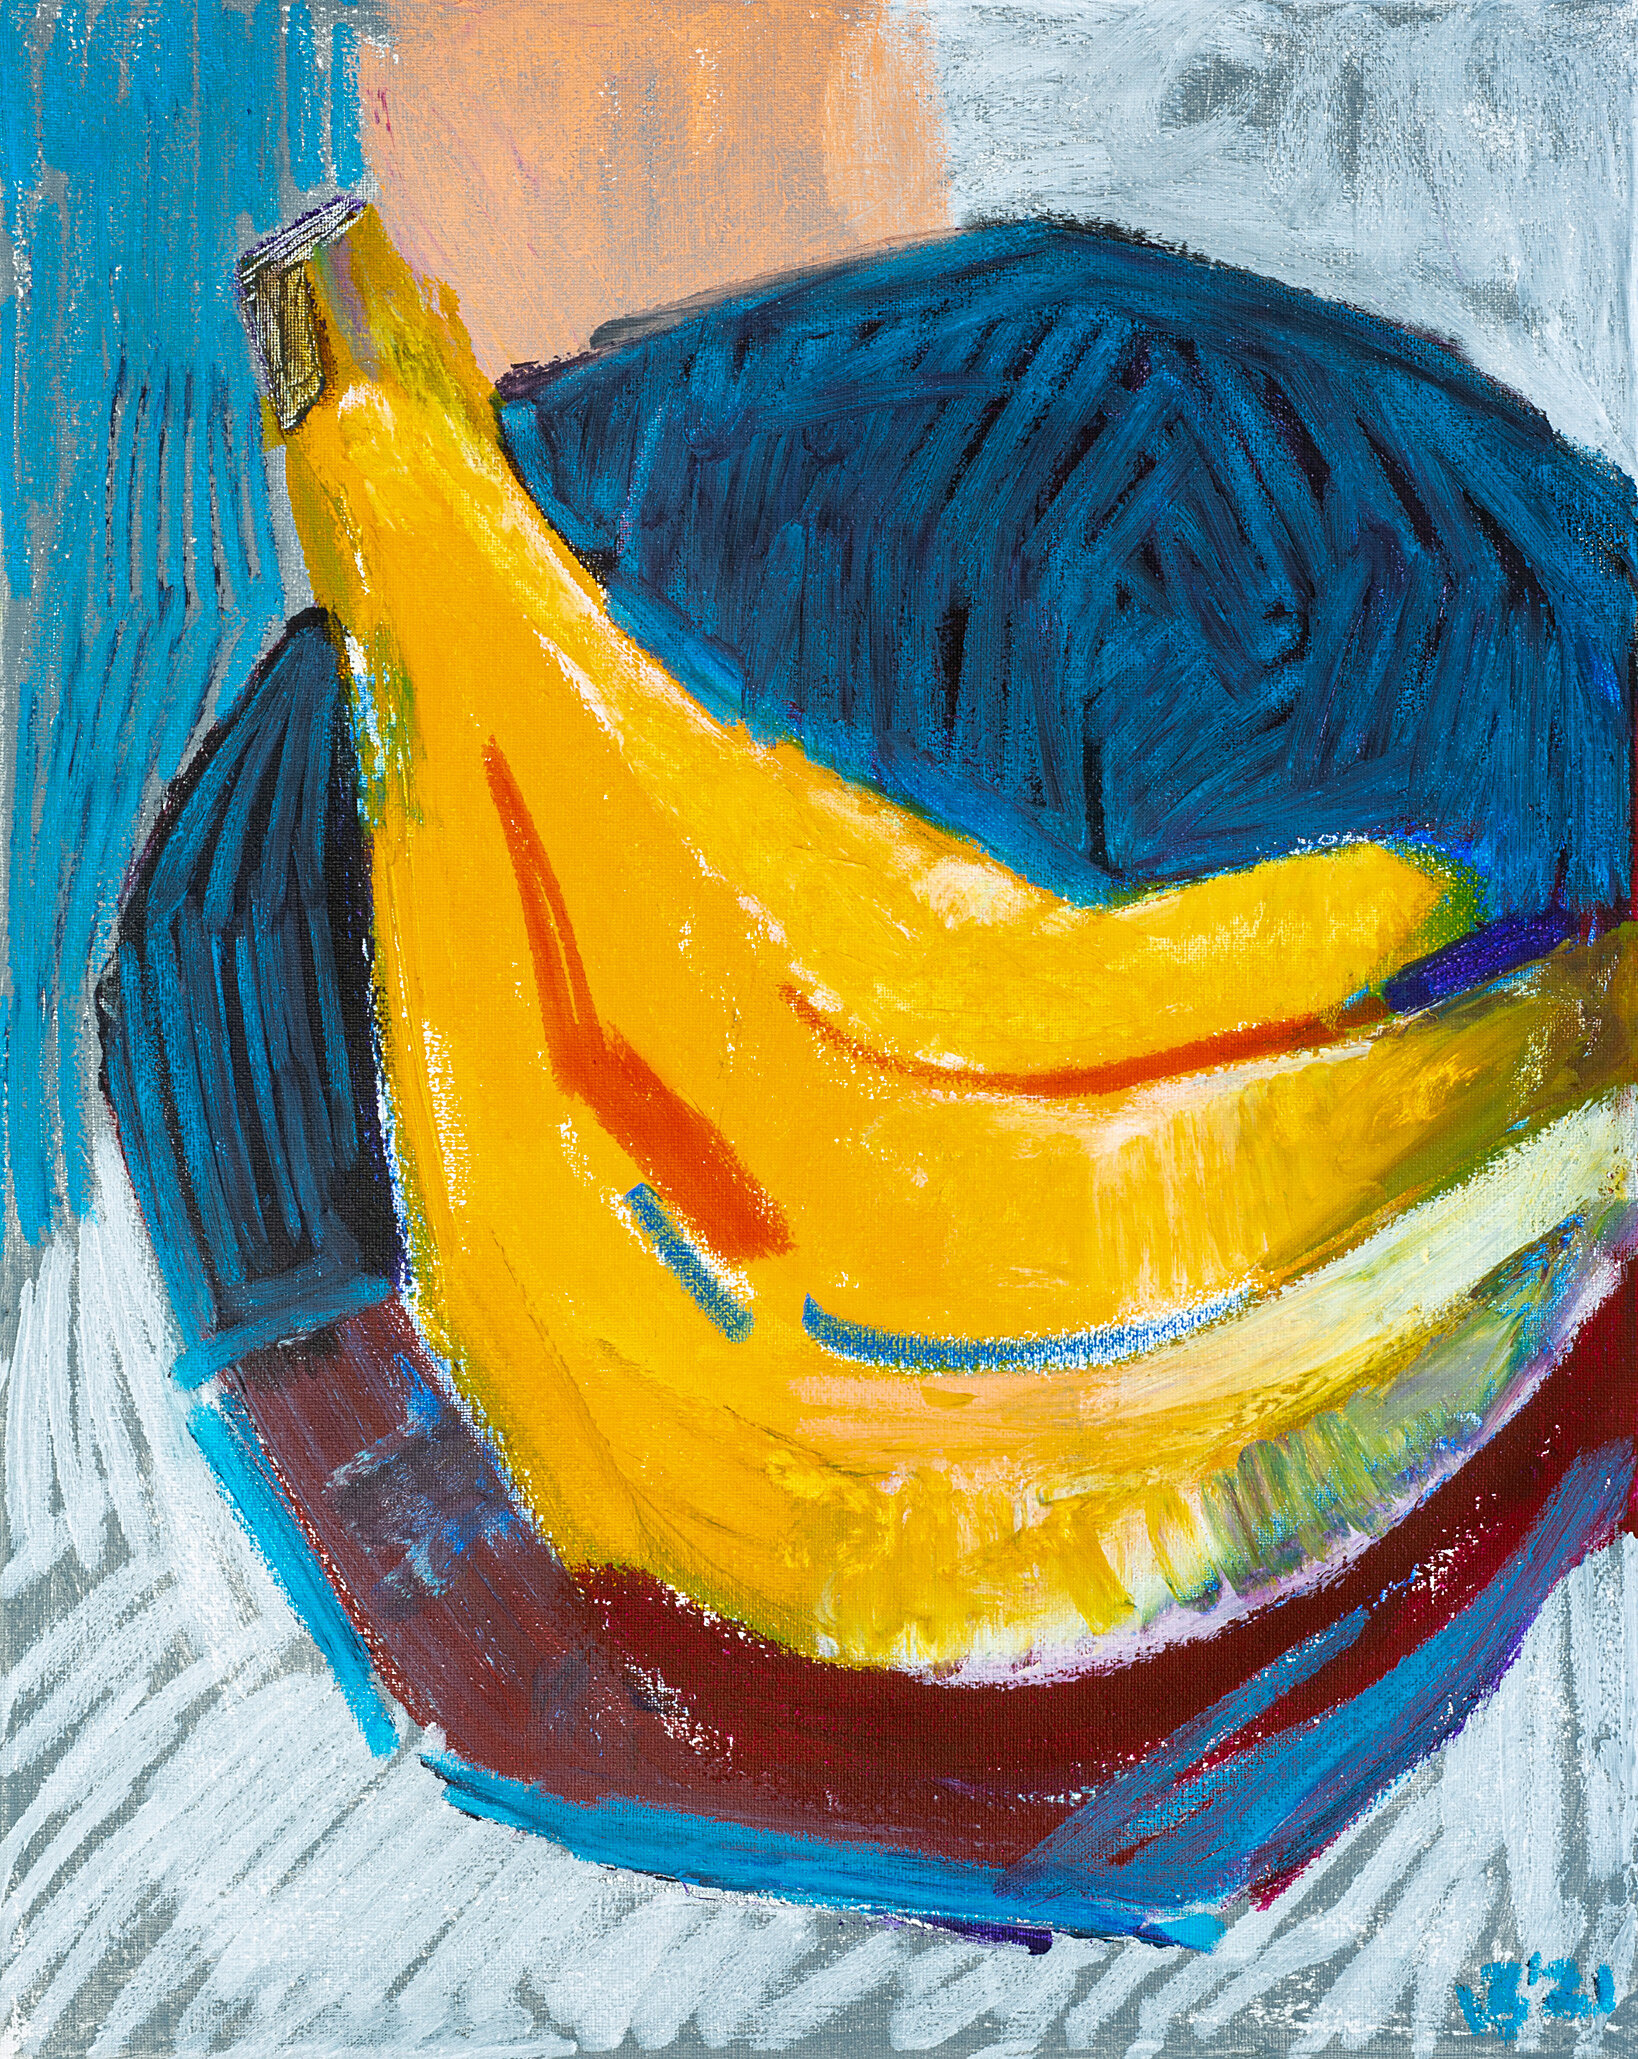 Blue Bowl with Bananas, 2021 - tempera sticks on canvas, 16x20in